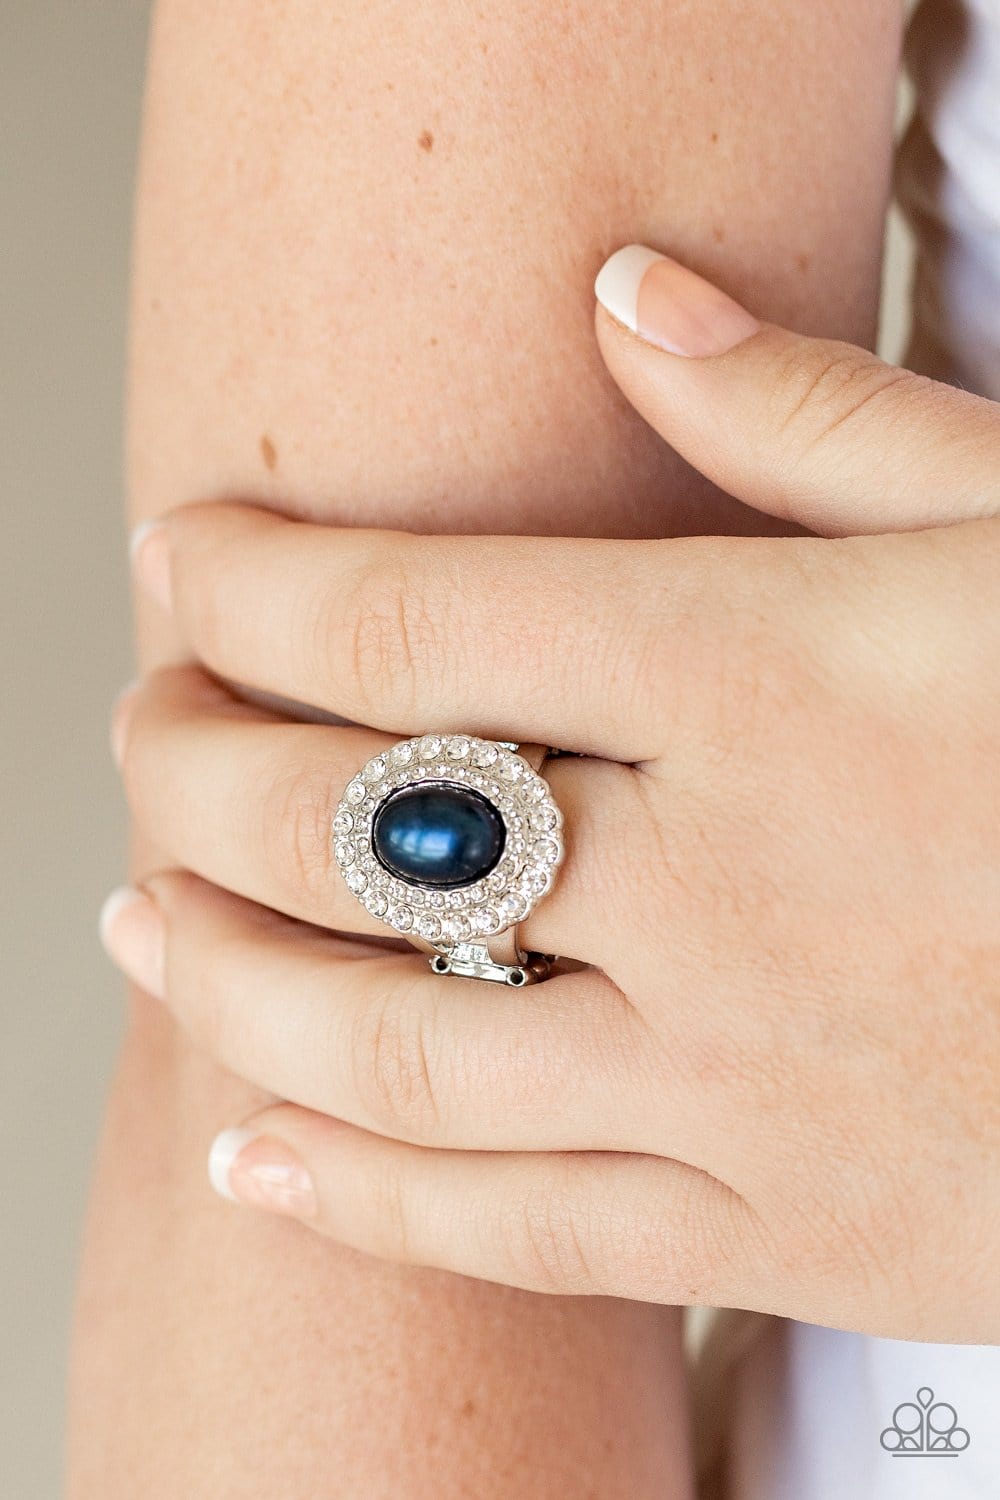 N'　Sprinkle　Boutique　Paparazzi　The　Jewels　–　Shimmer　Accessories:　Ring　Thingz　On　Blue